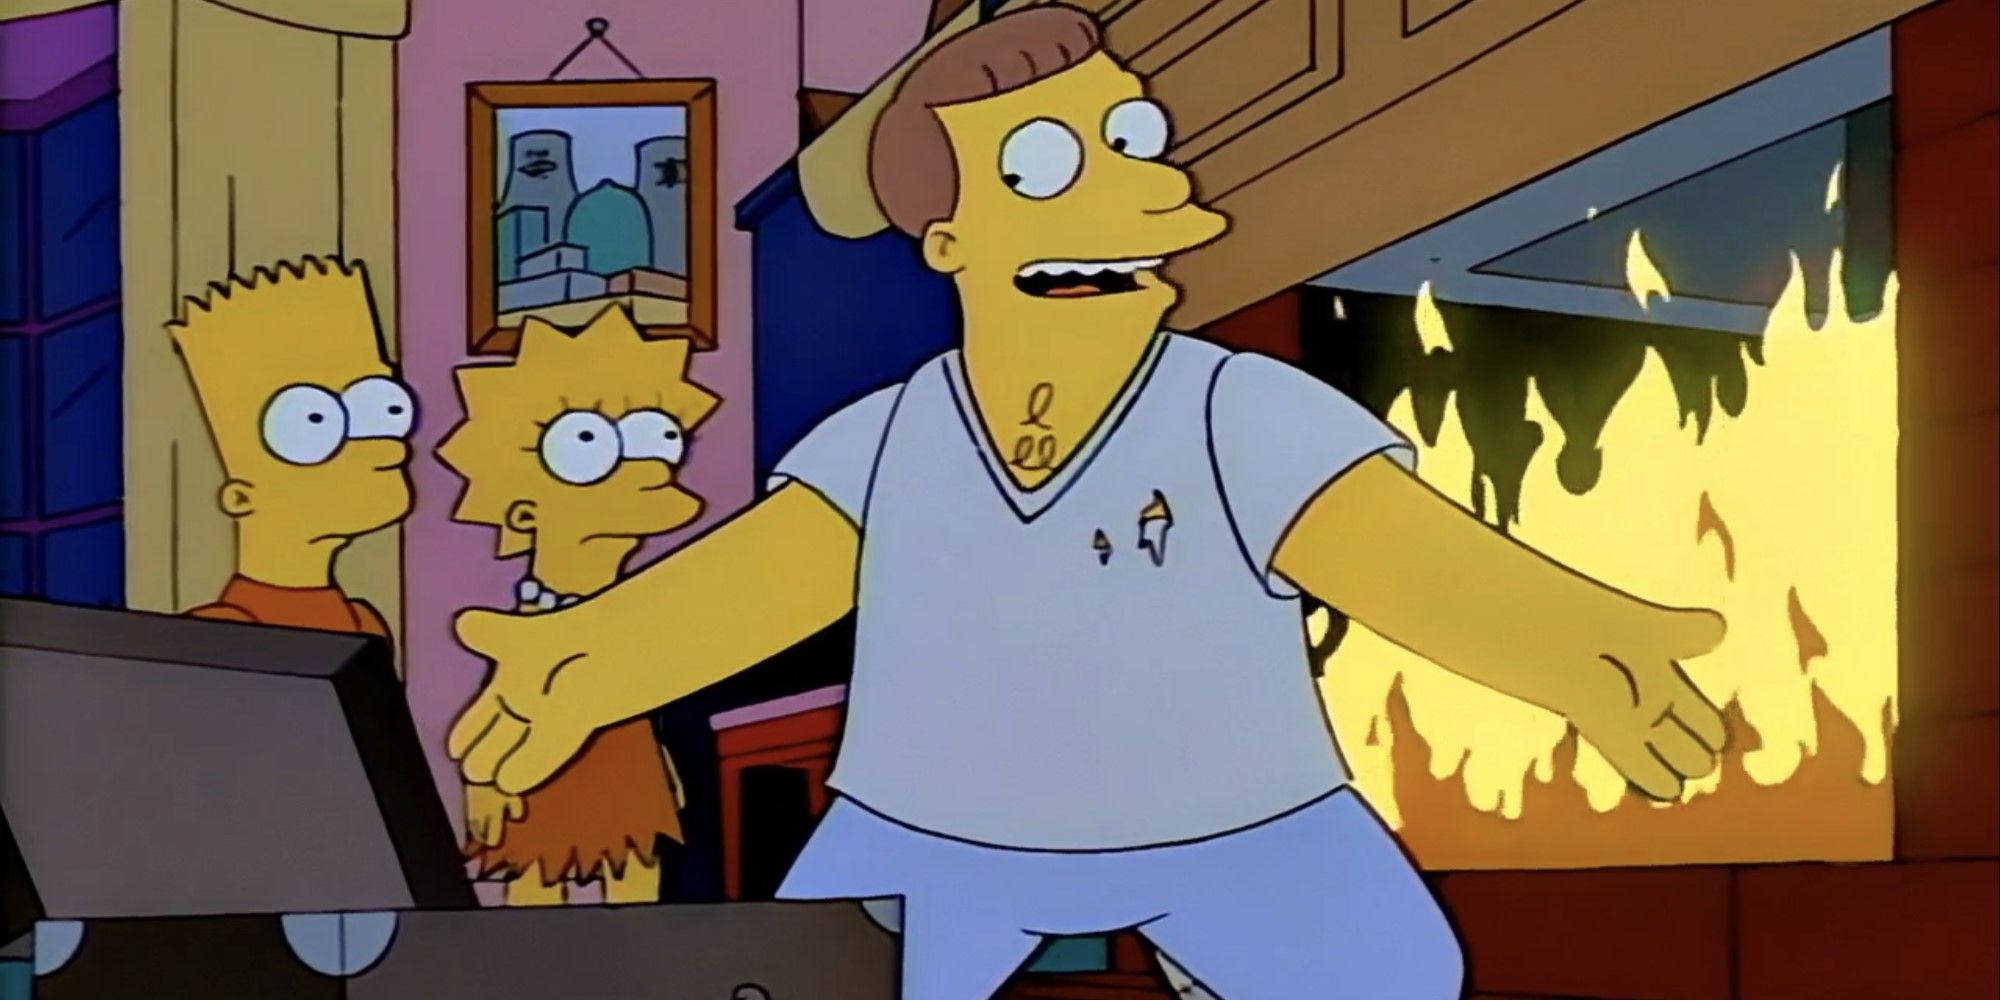 Lisa and Bart watch as Lionel Hurtz smiles while fire burns in the background in The Simpsons